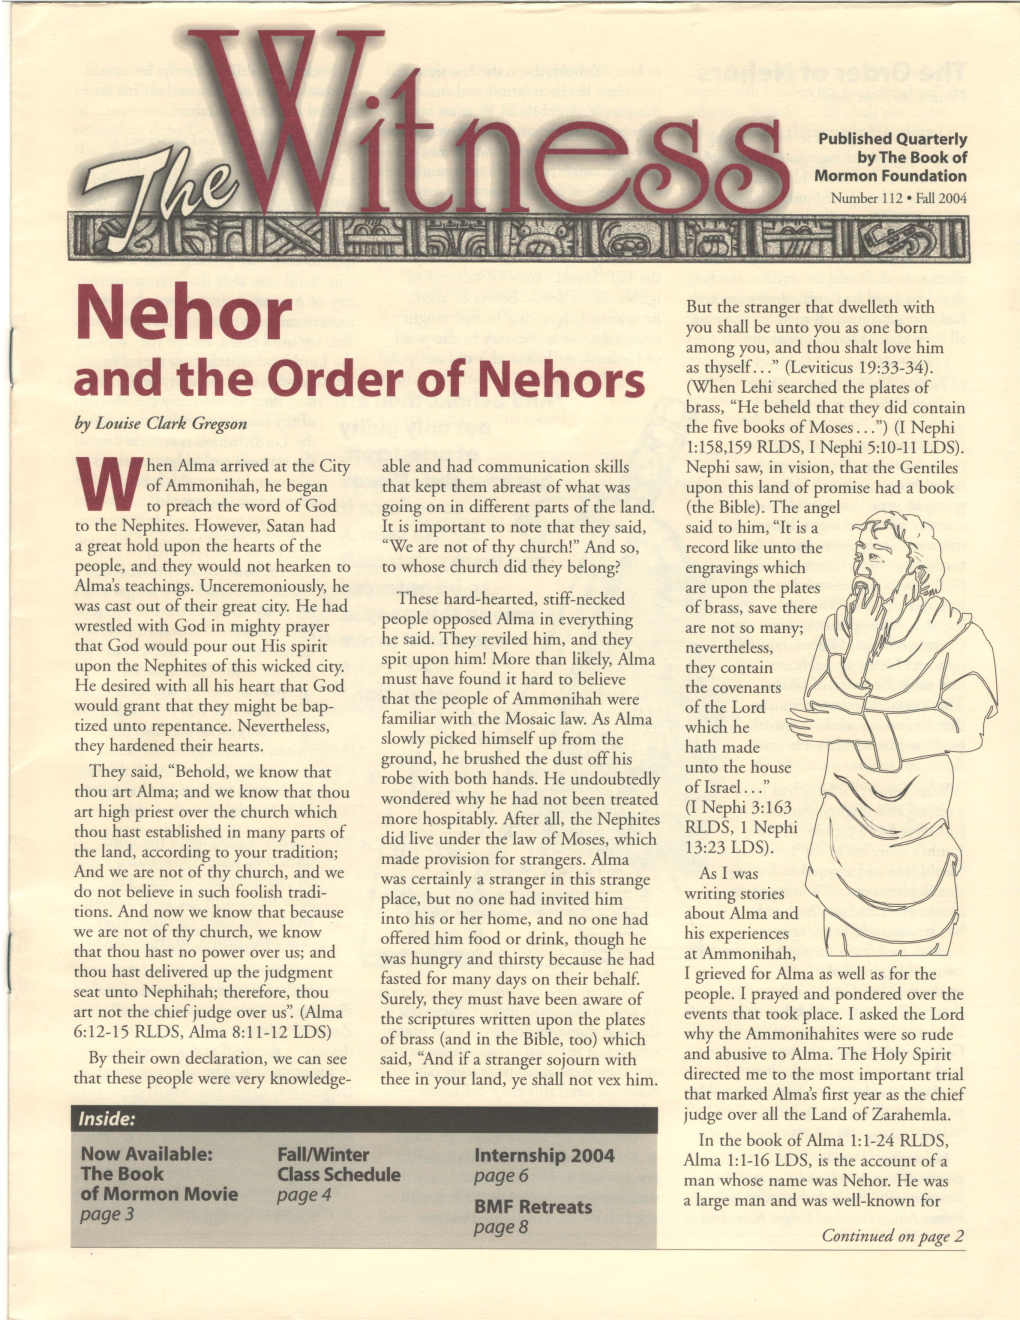 And the Order of Nehors